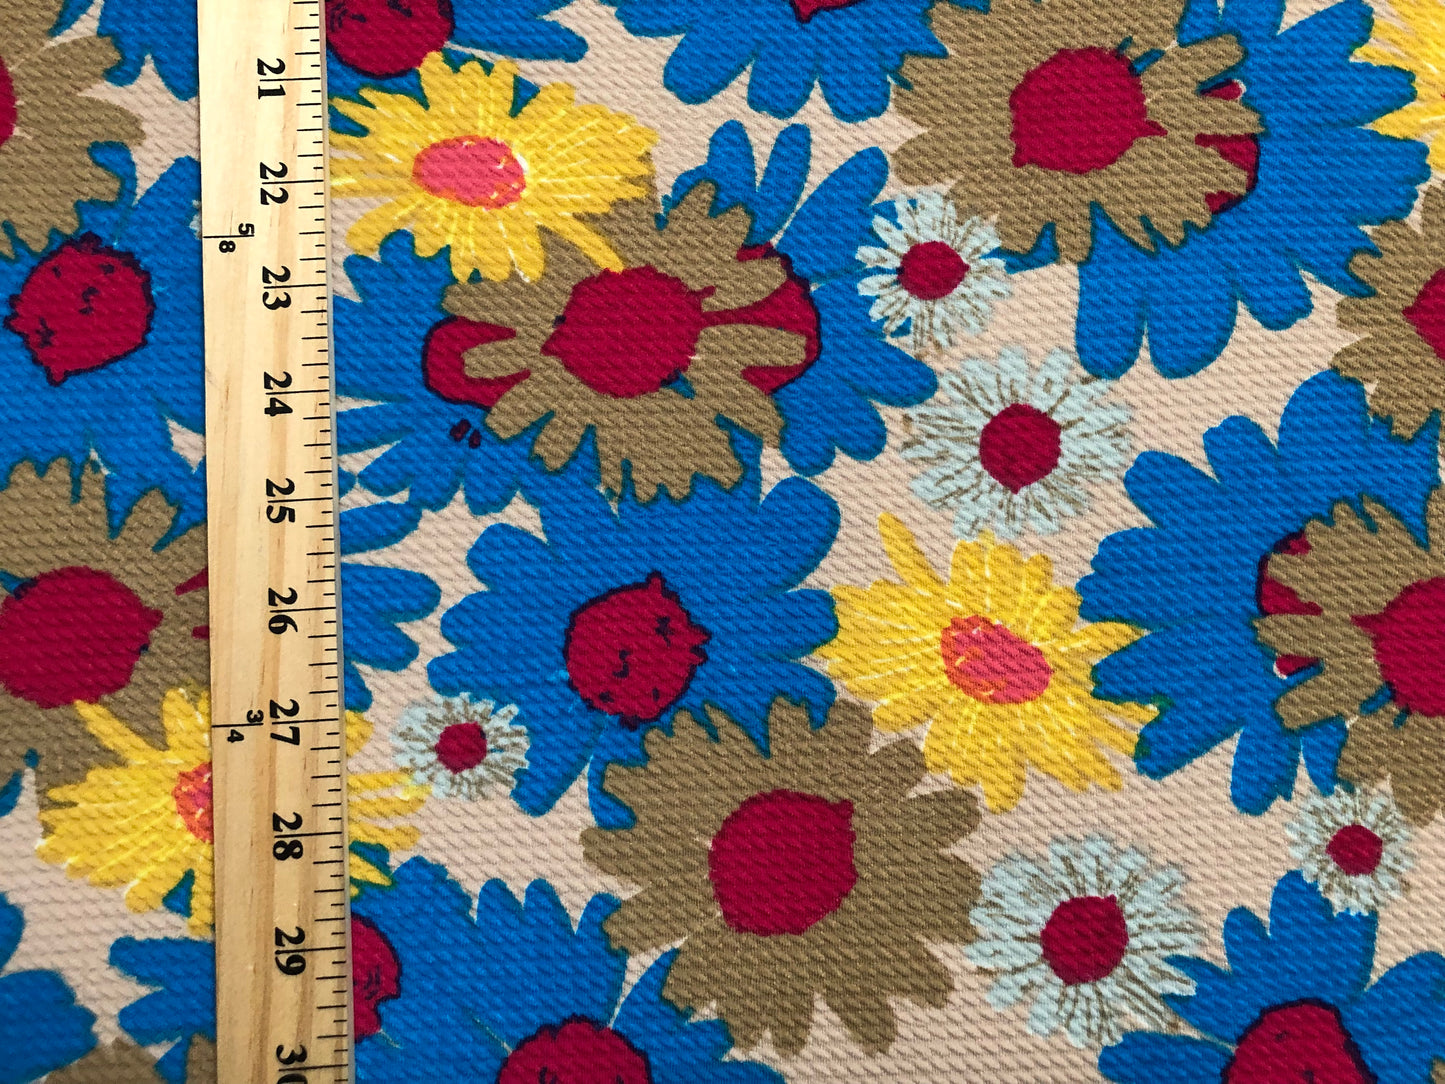 Bullet Knit Printed Fabric-Blue Brown Sunflowers-BPR243-Sold by the Yard